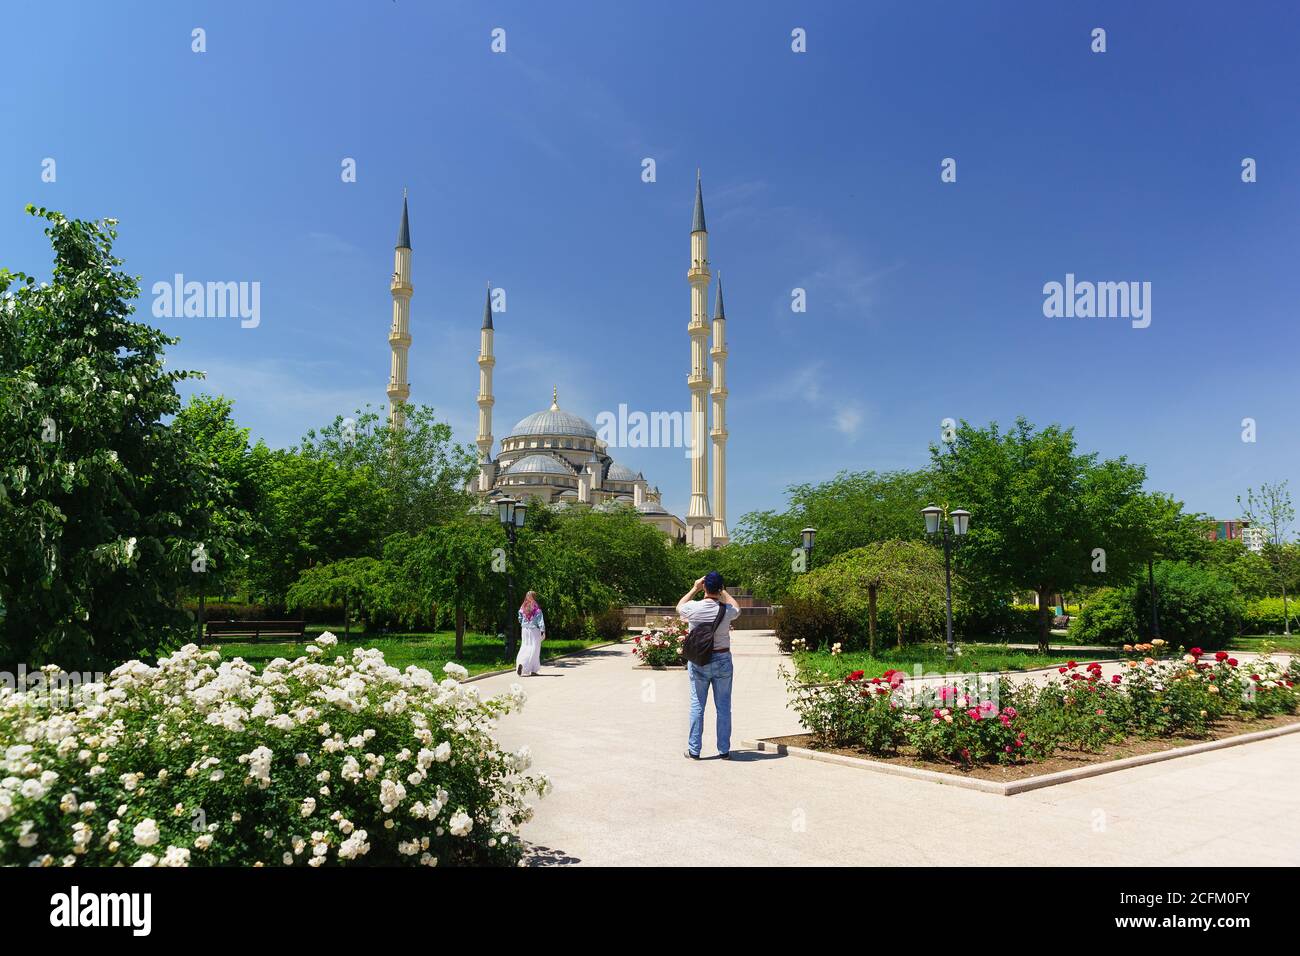 Grozny, Chechen Republic, Russia - June 02, 2019: Tourists walk in the Park near the mosque Heart of Chechnya. Sunny summer day Stock Photo